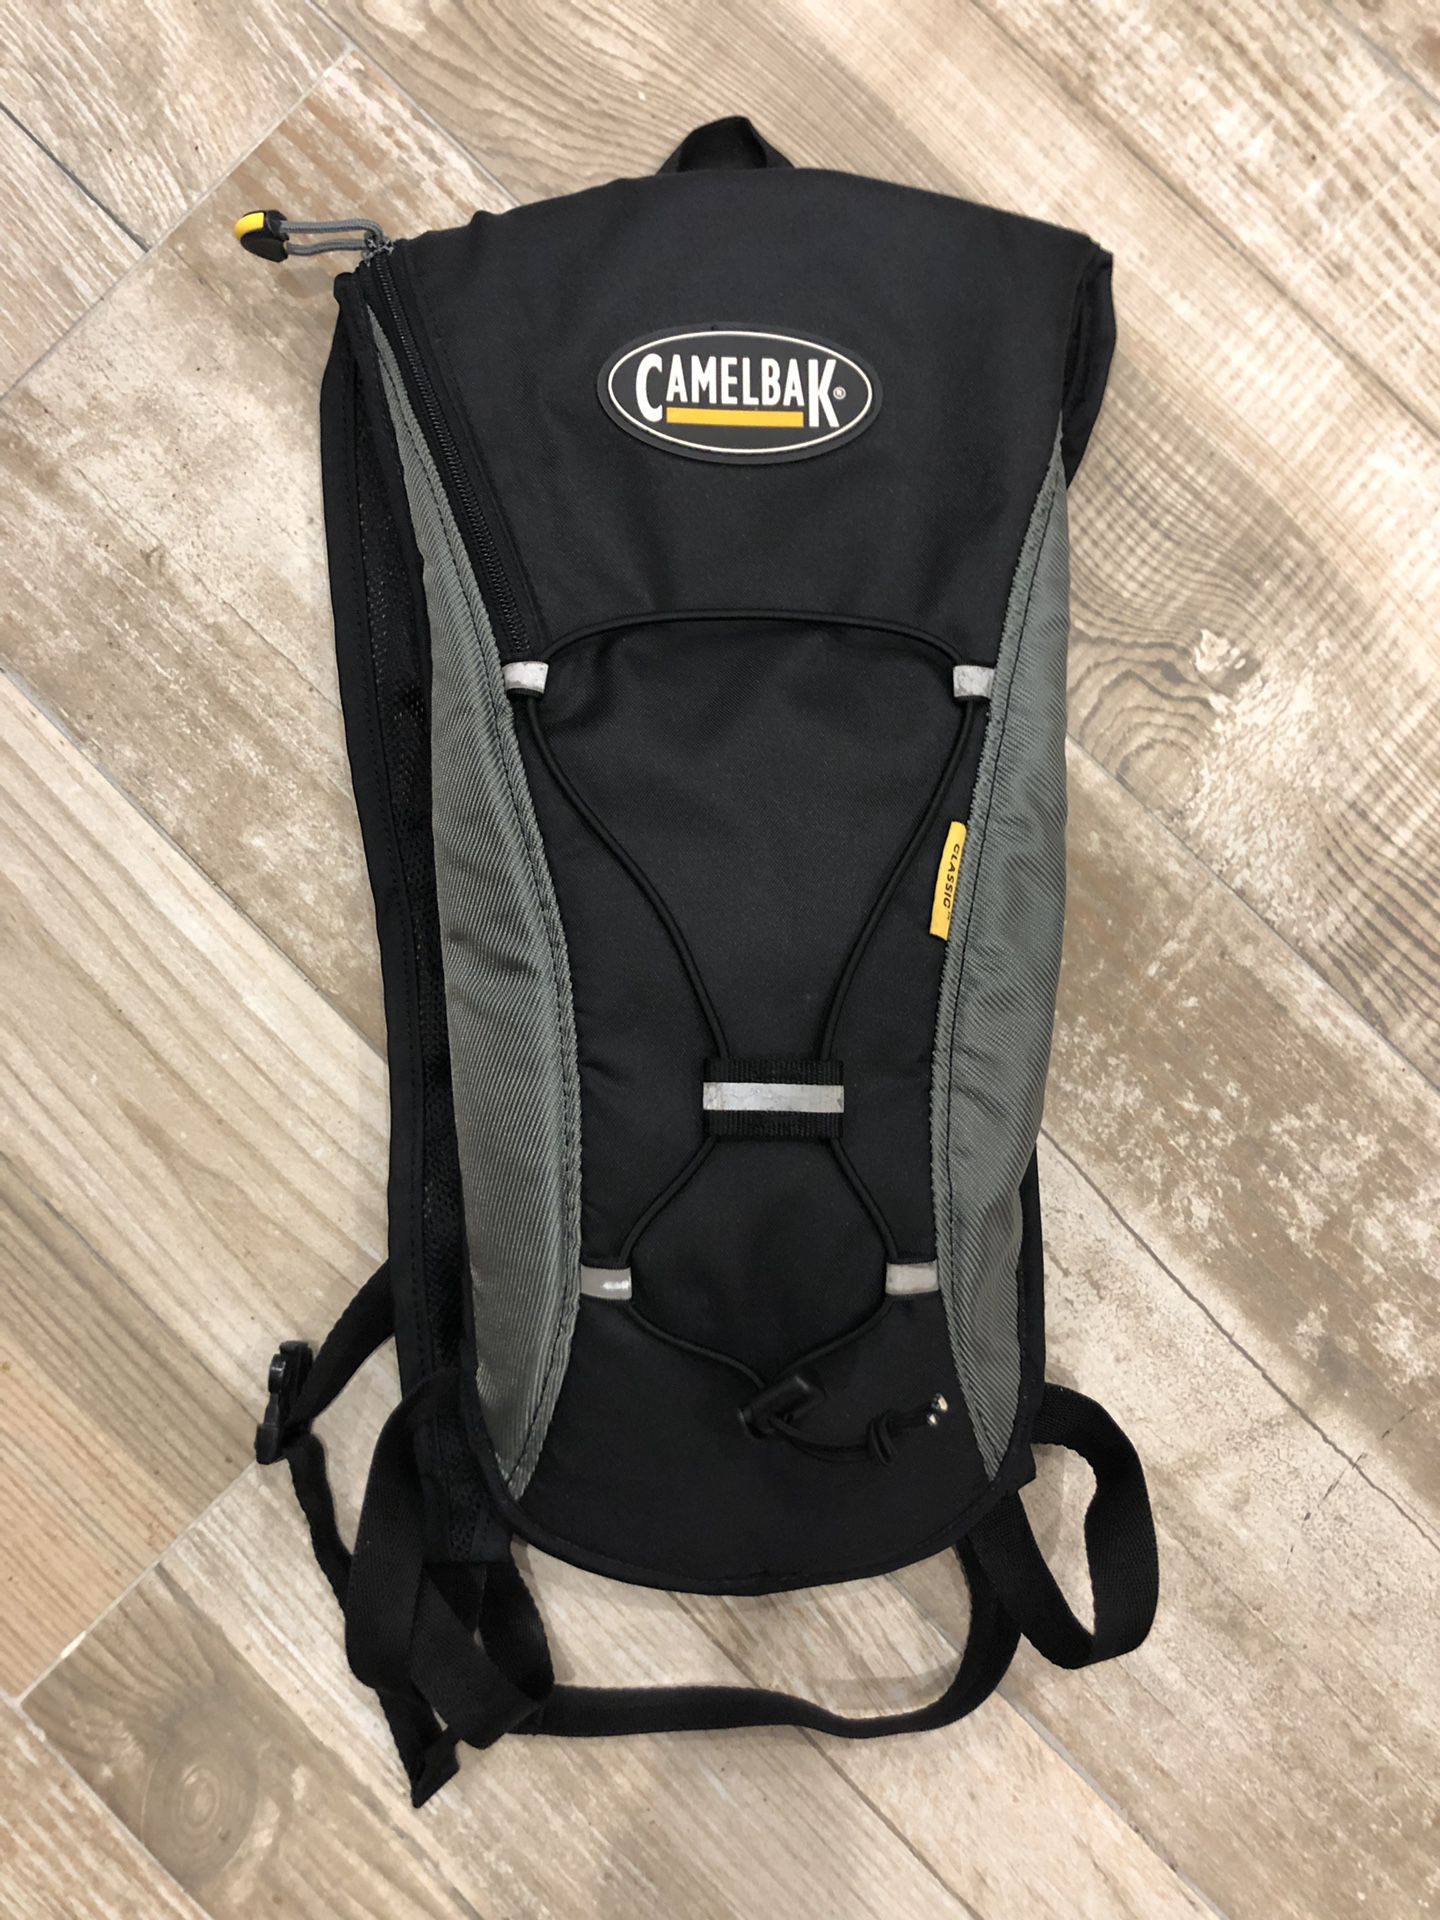 Camelbak Classic 2L Hydration Backpack.